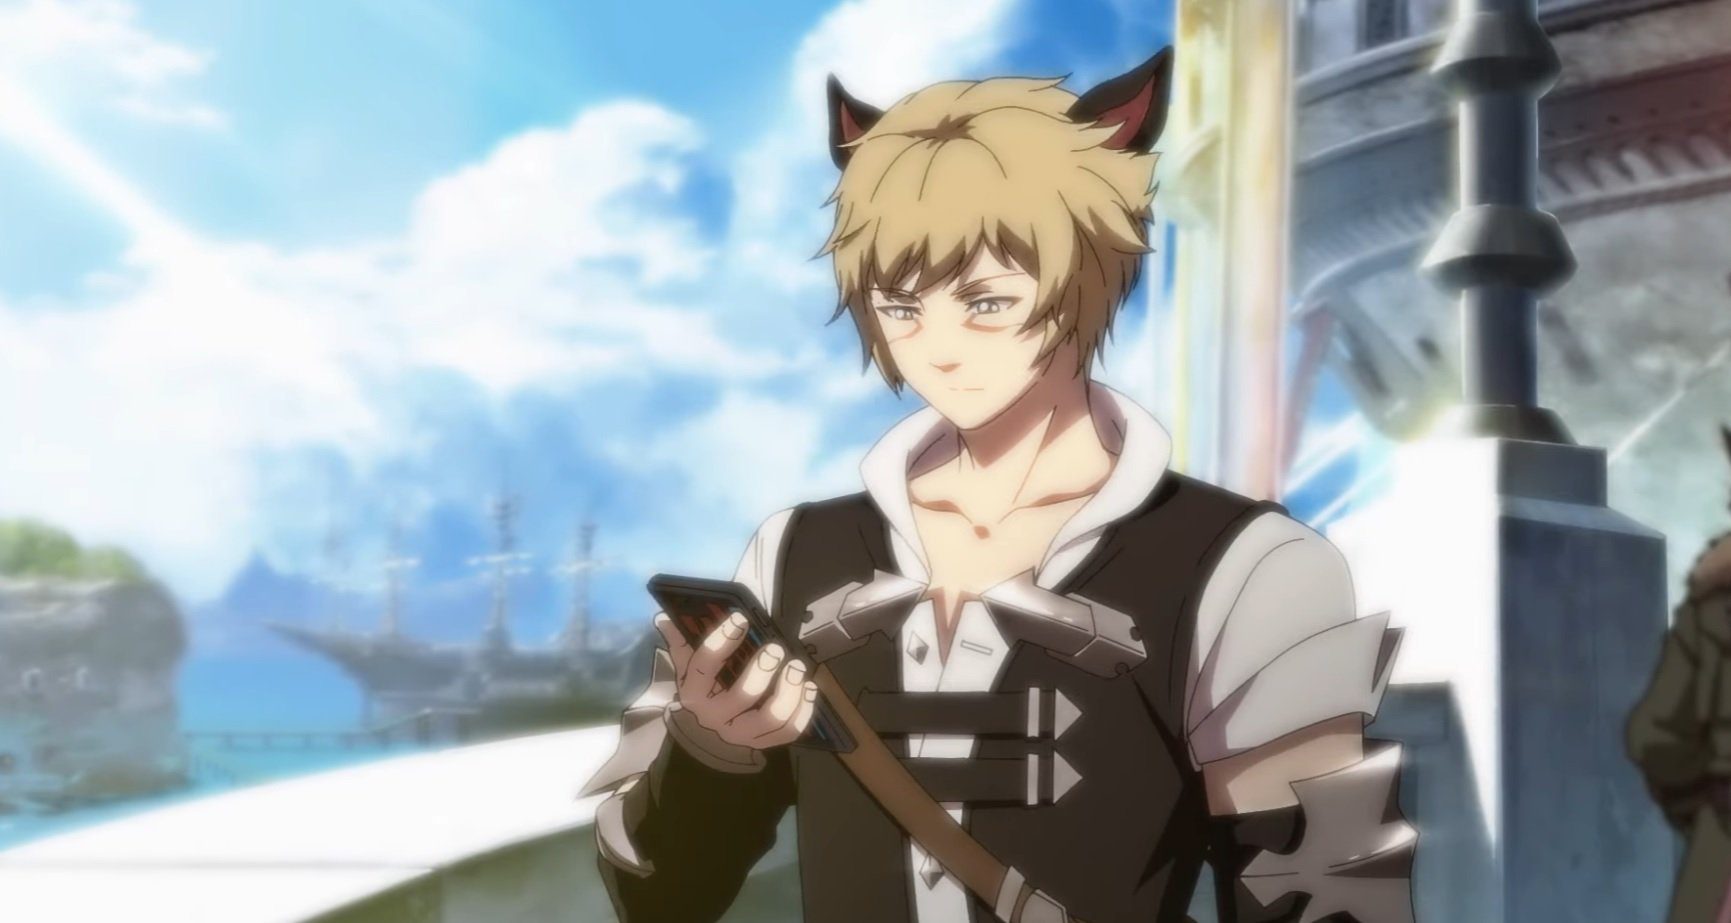 This Final Fantasy 14 anime short captures everything I love about the game  | PC Gamer